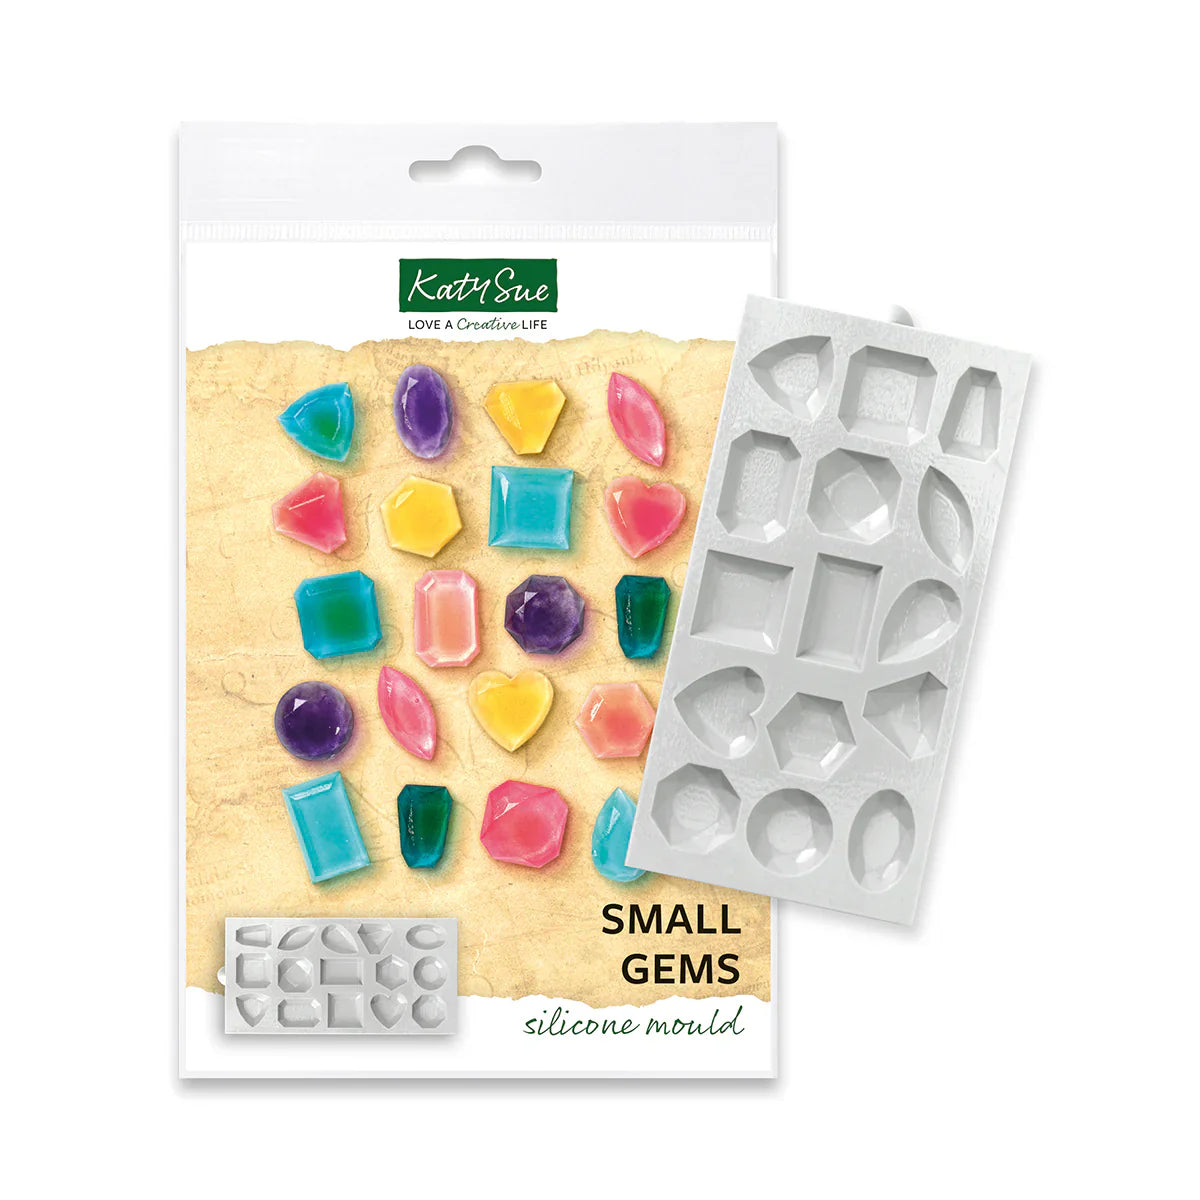 Small Gems Silicone Mould